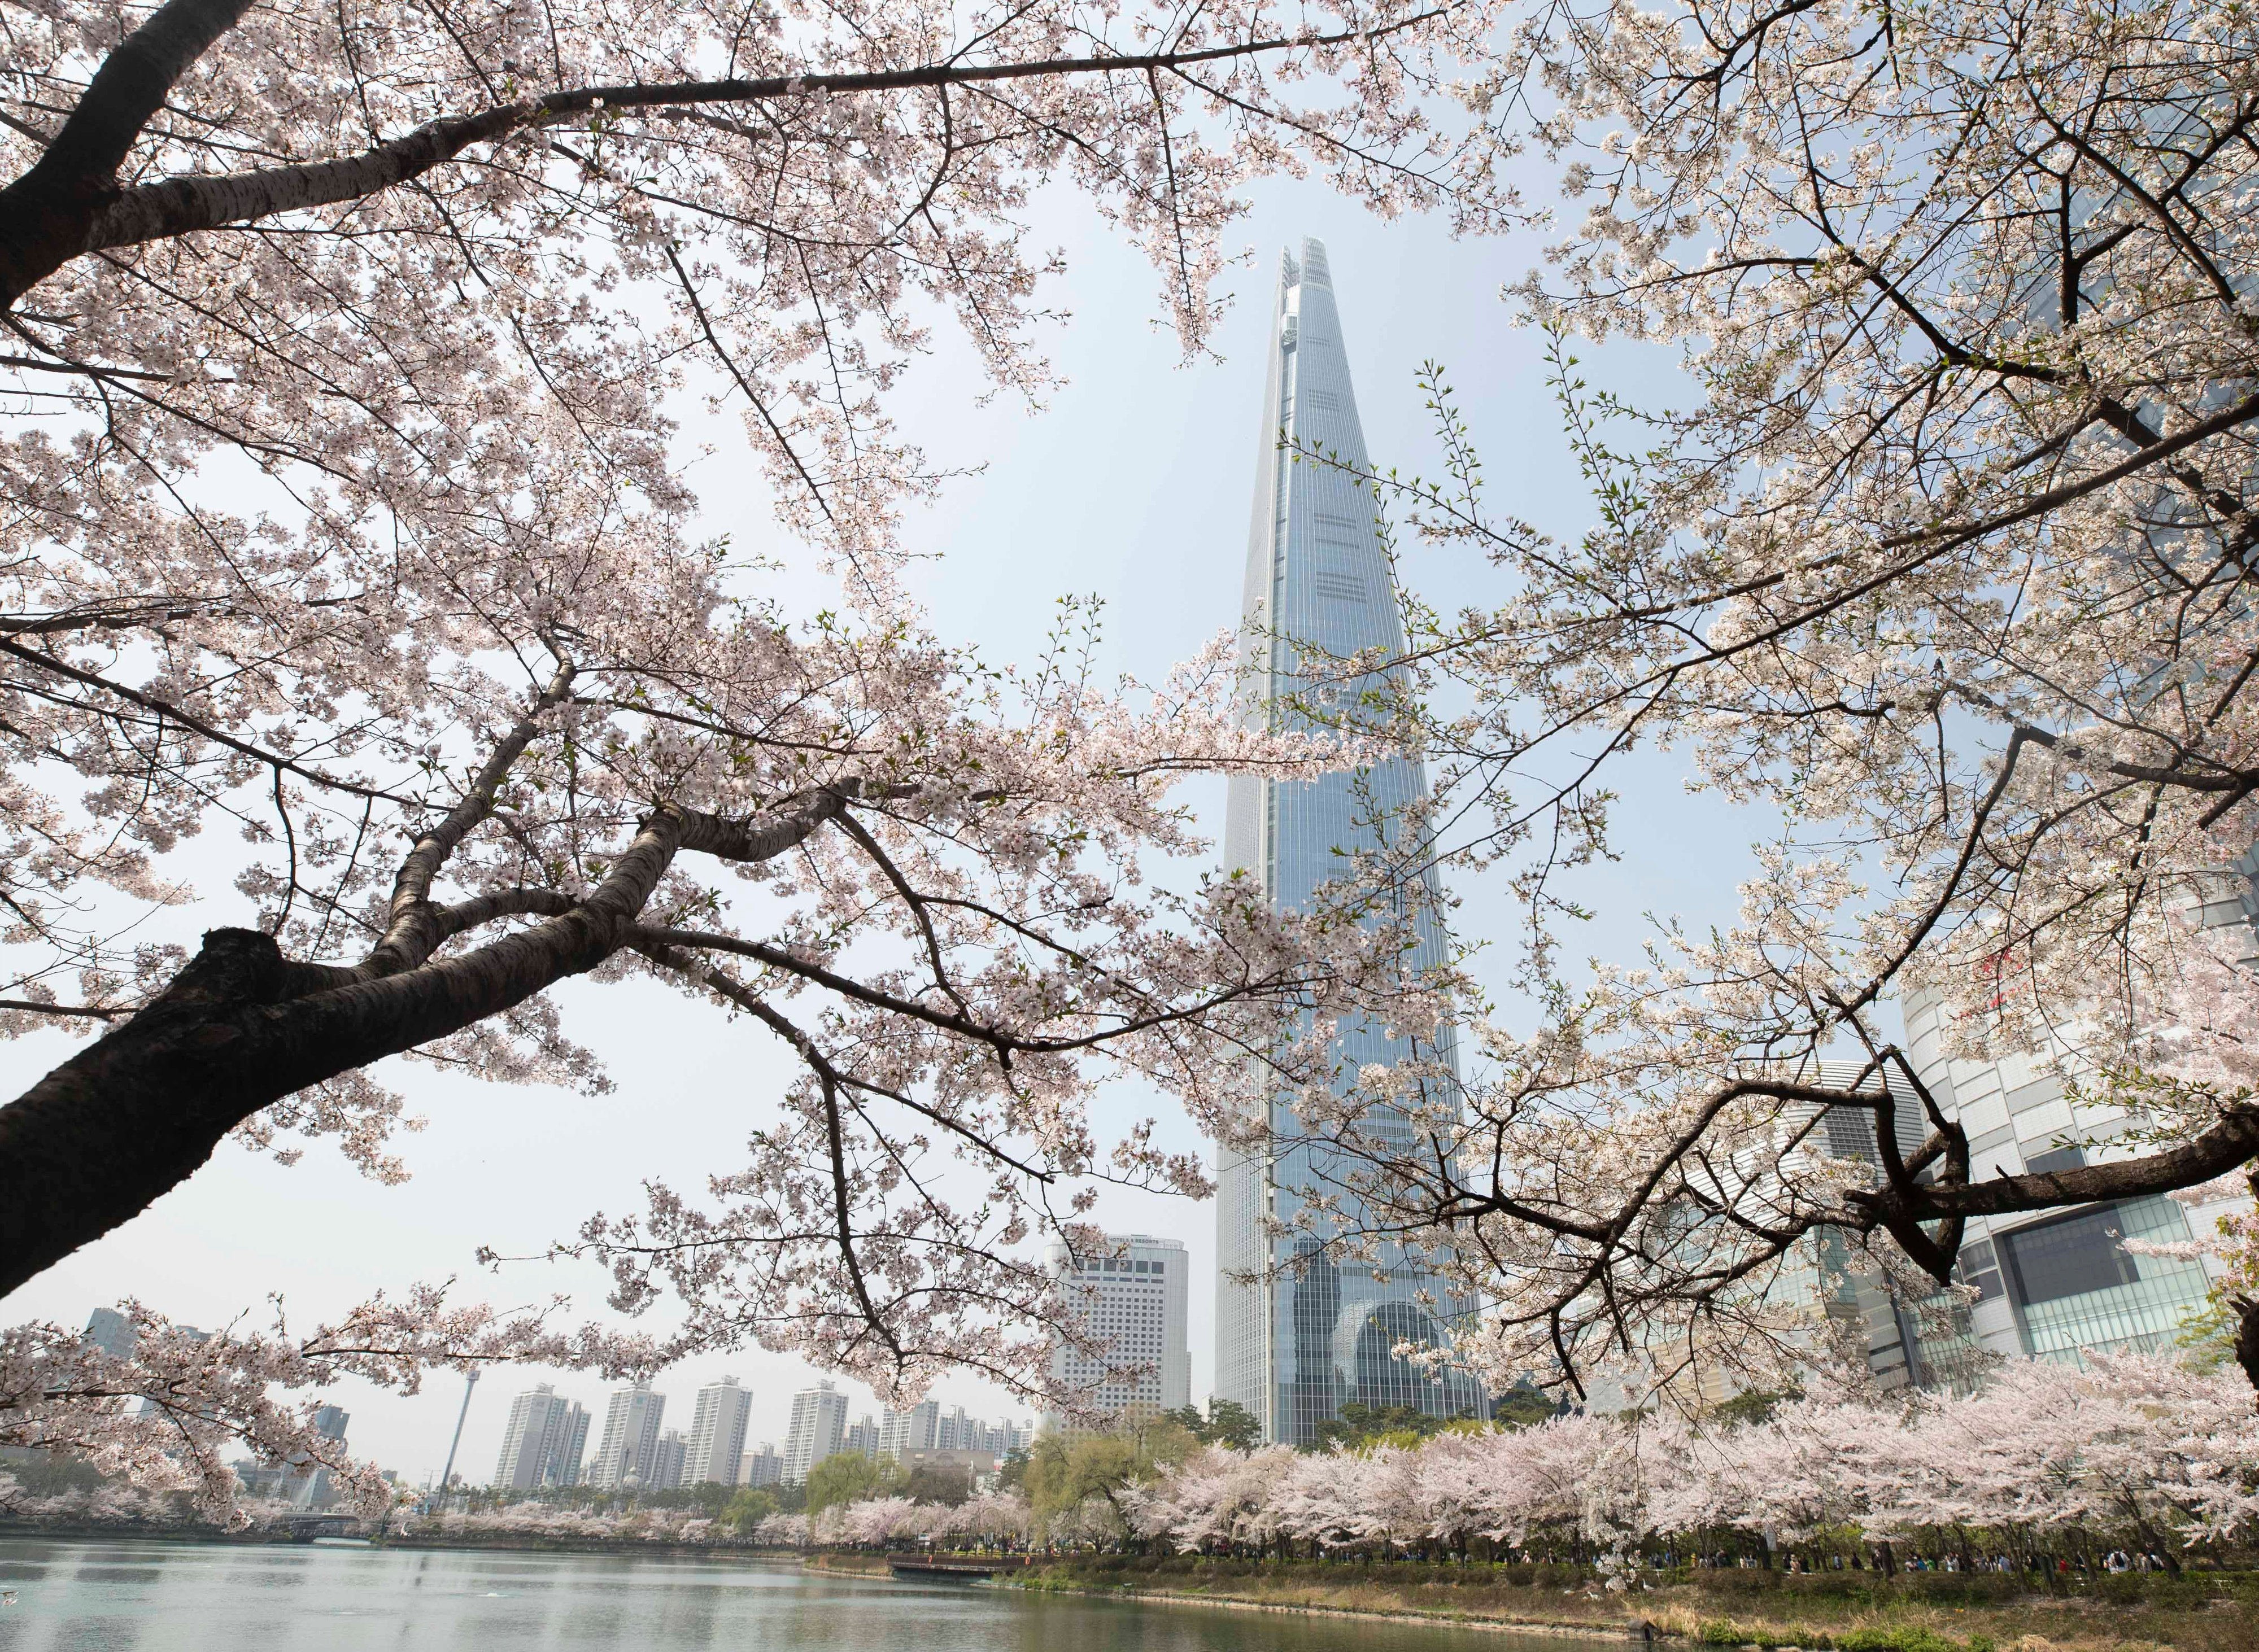 Cherry blossoms bloom in front of the Lotte World Tower in Seoul on April 7. Seoul’s commercial property market is a standout performer in Asia but receives far less attention than other markets. Photo: Xinhua